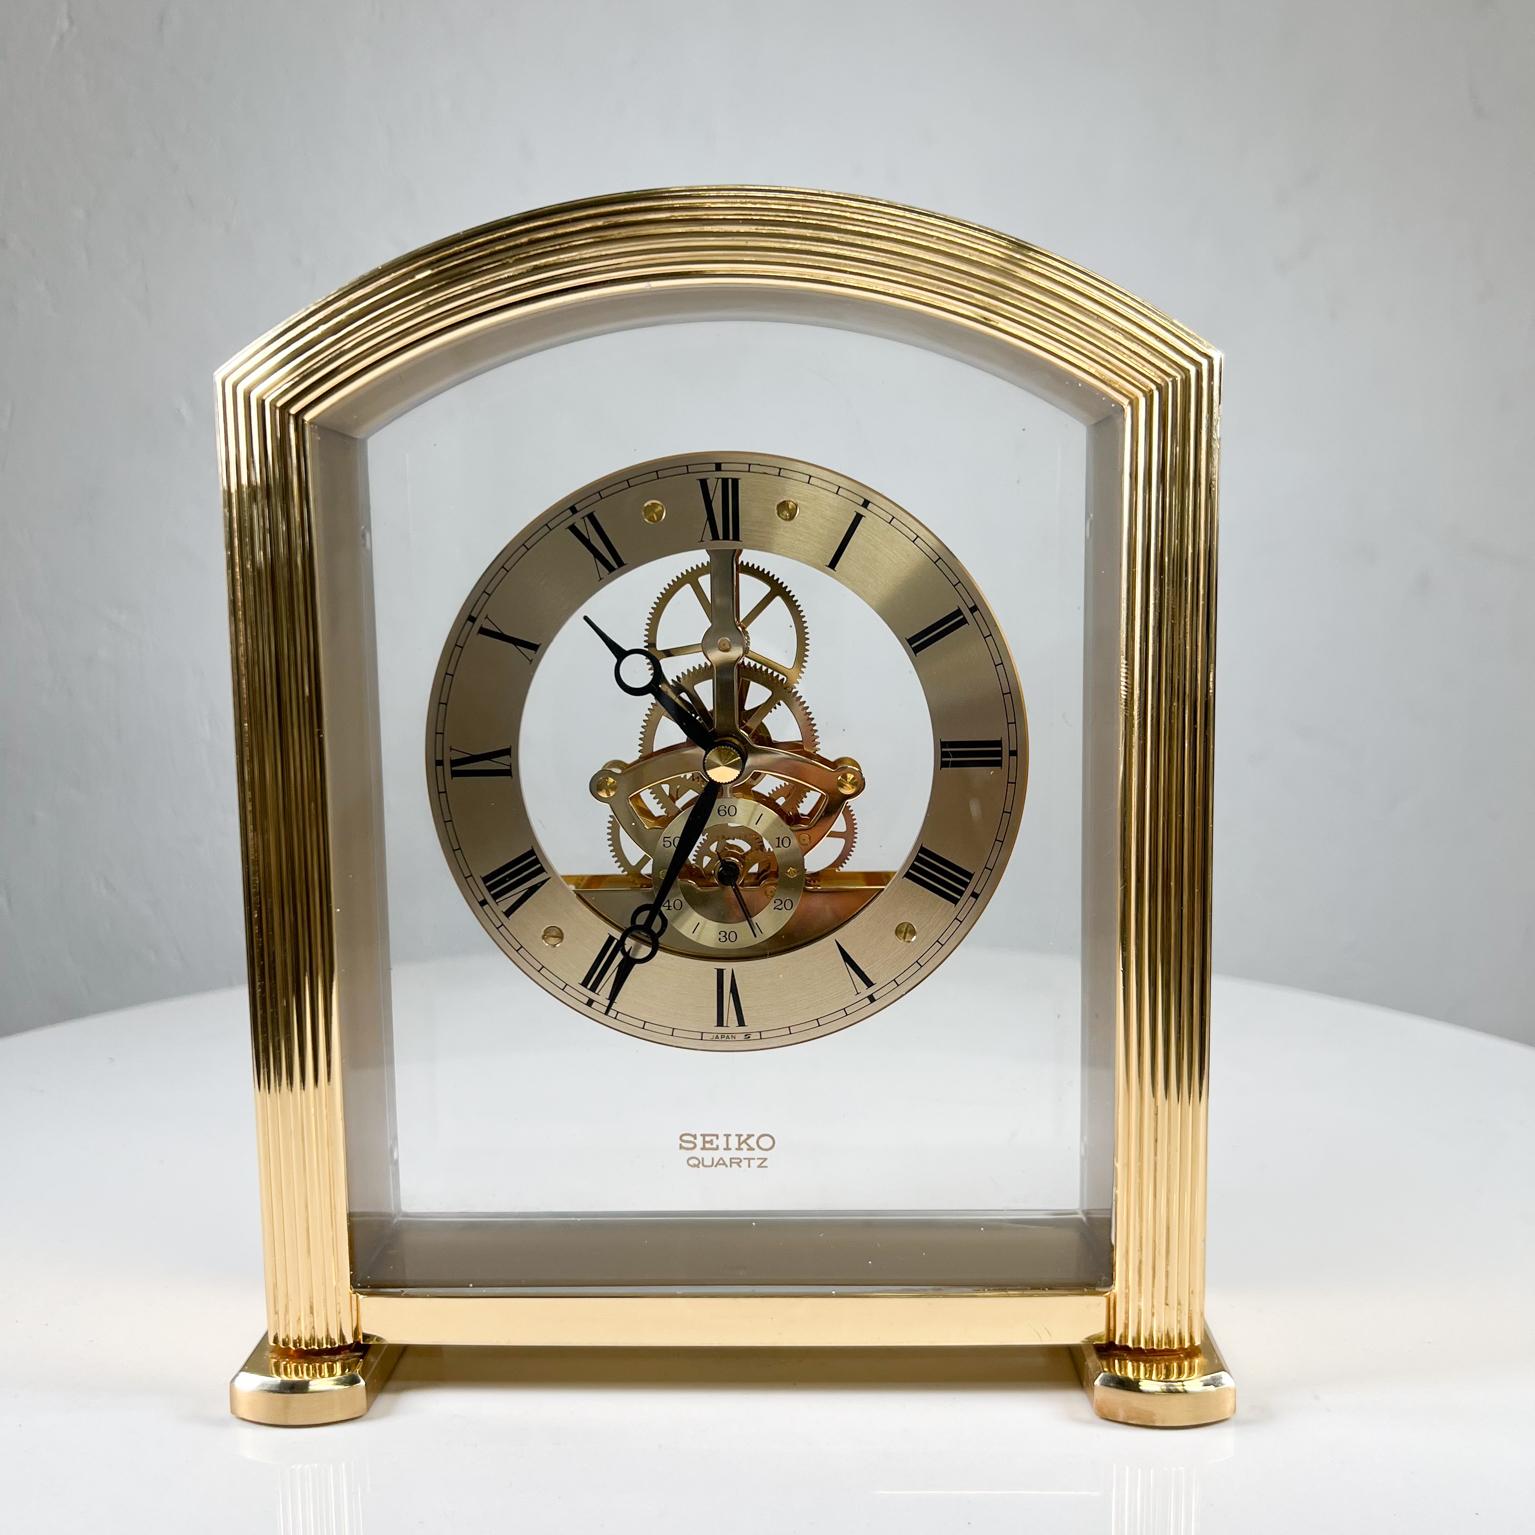 1980s Modern Seiko Skeleton Quartz desk clock in brass
Measures: 8.75 tall x 2.25 depth x 7.38 width
Preowned unrestored vintage condition
Tested and working
See images provided.

  